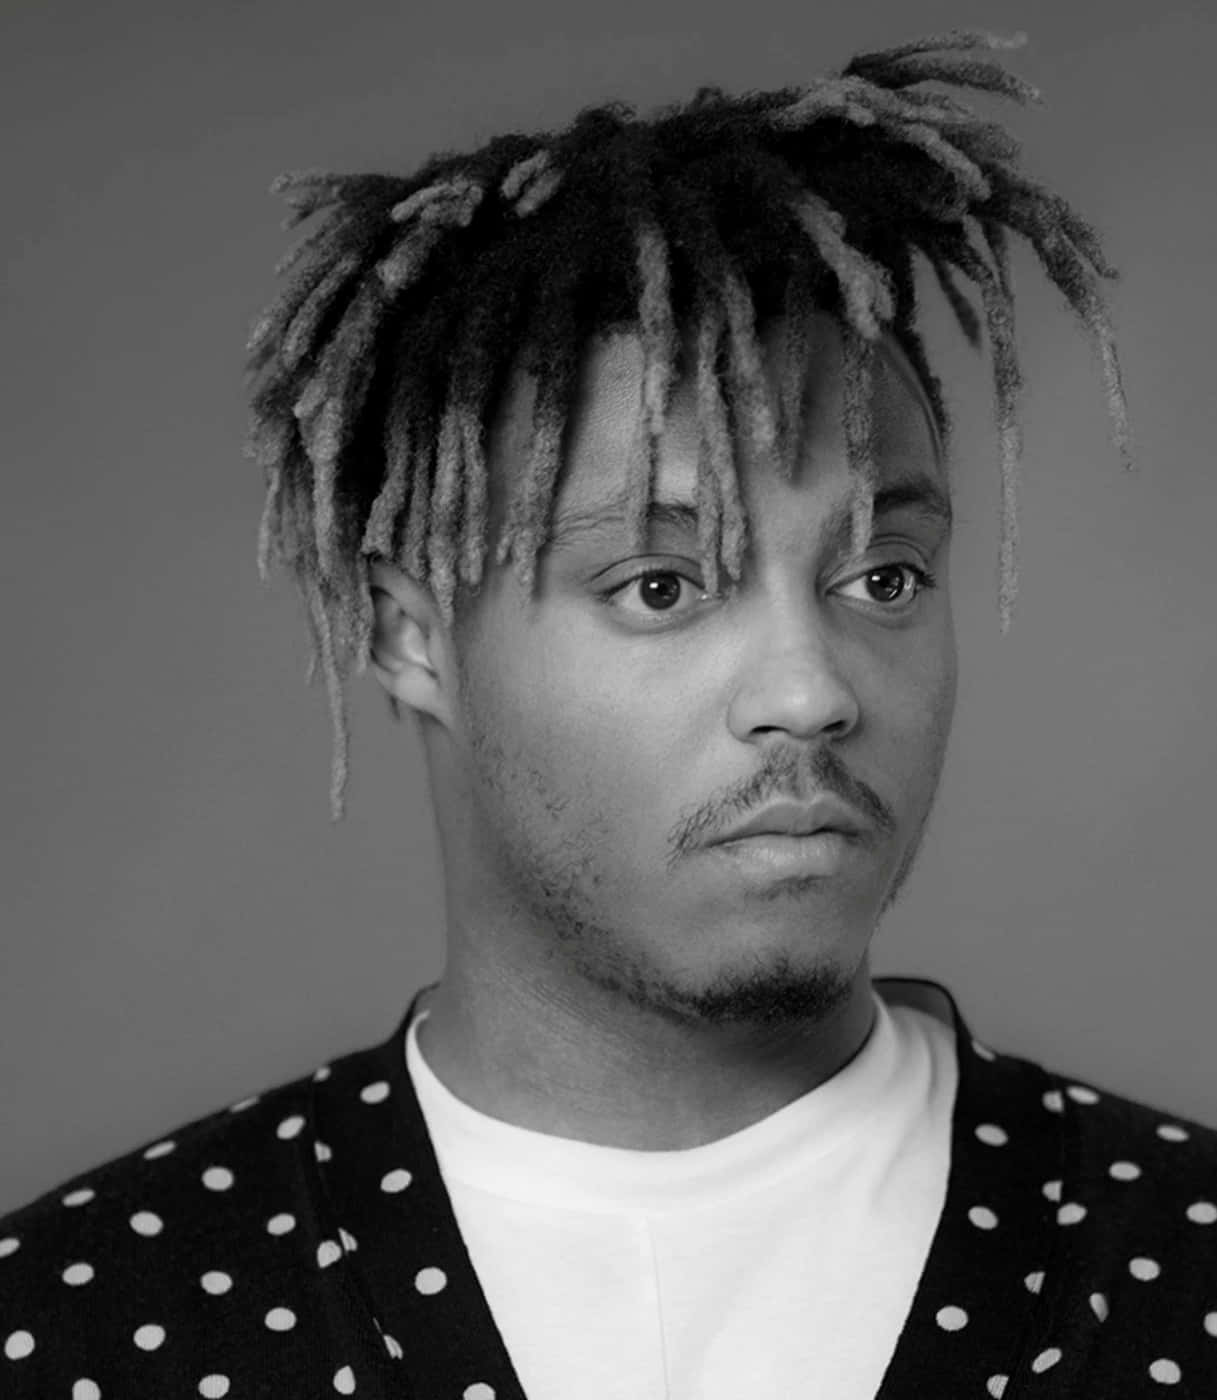 Juice Wrld brings his music to the stage with his insightful and honest lyrics.